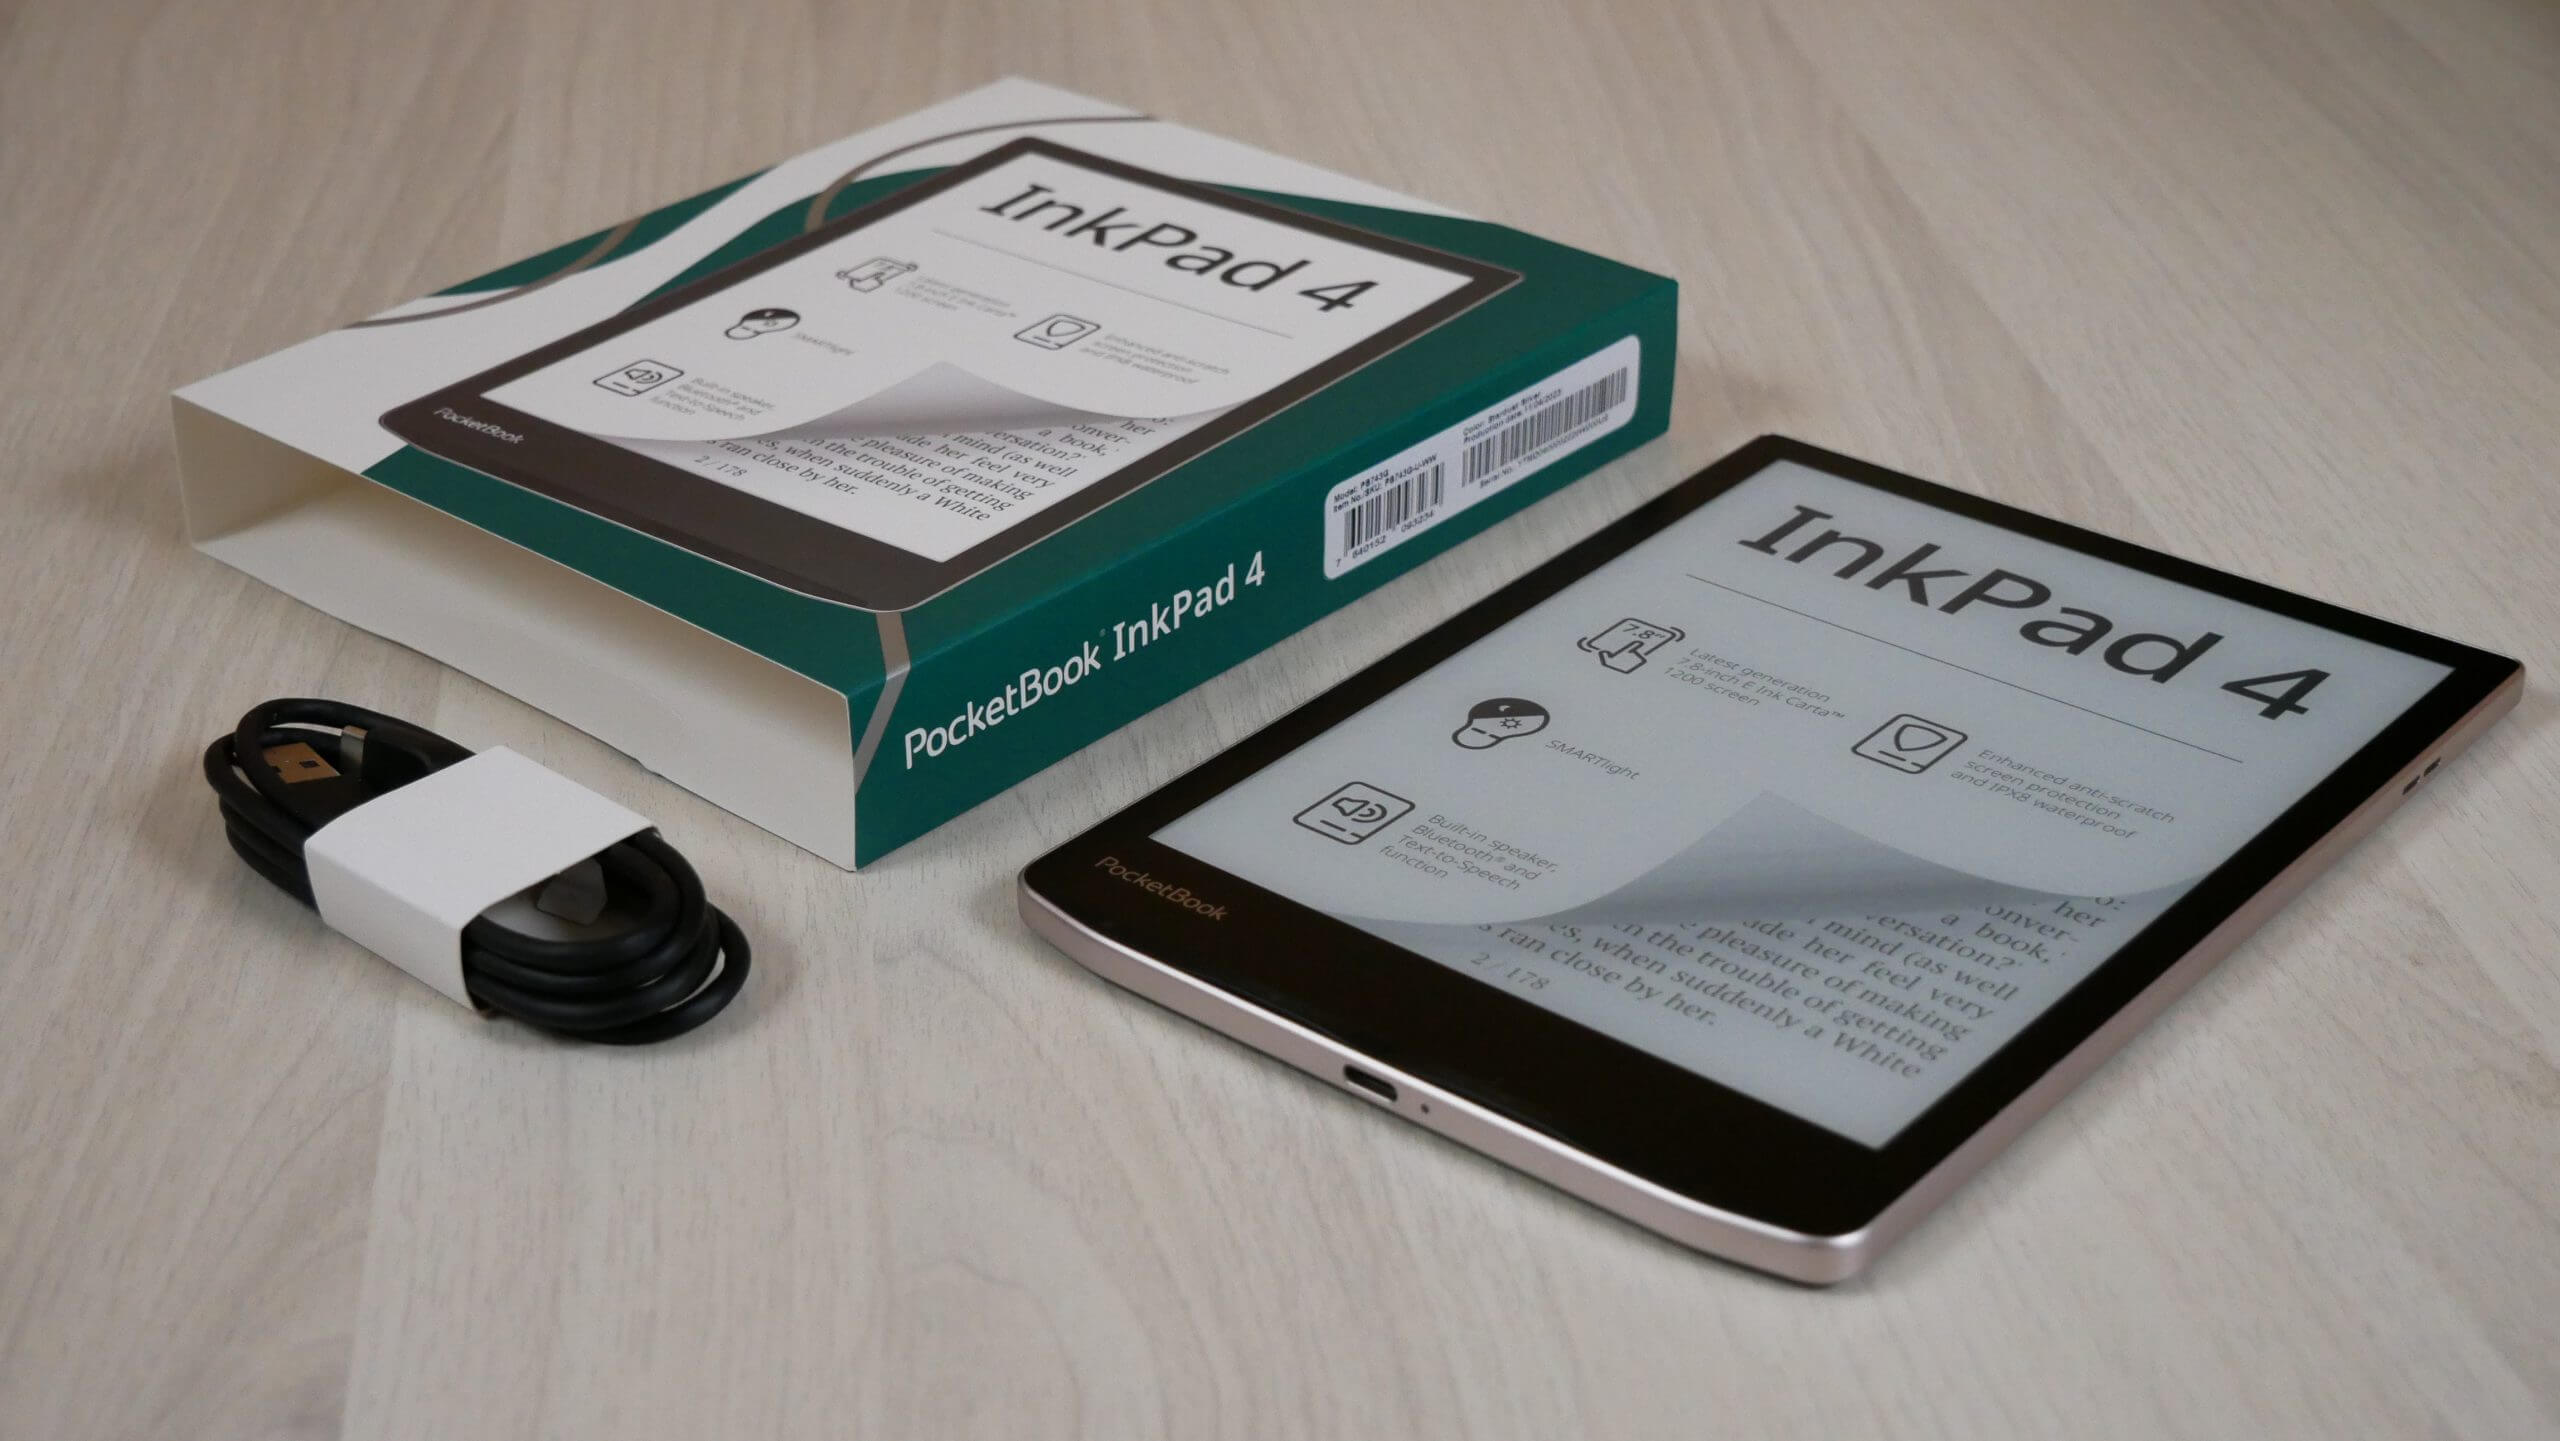 PocketBook InkPad 4 can withstand immersion into fresh water to a depth of  2 meters for up to 60 minutes